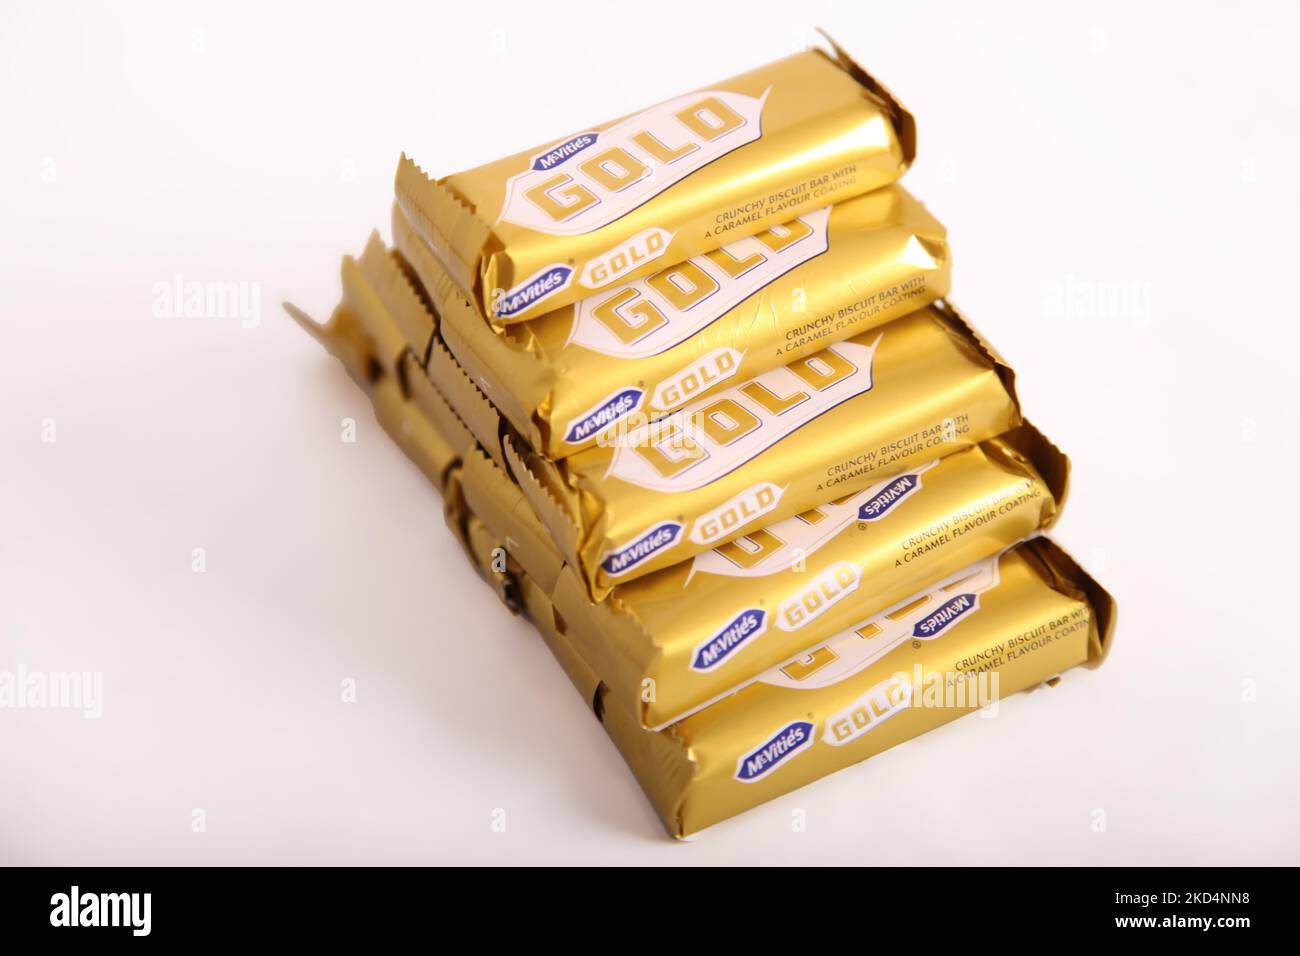 Stack of McVities Gold Bars in neat pile - multiple golden chocolate bar snack treat Stock Photo